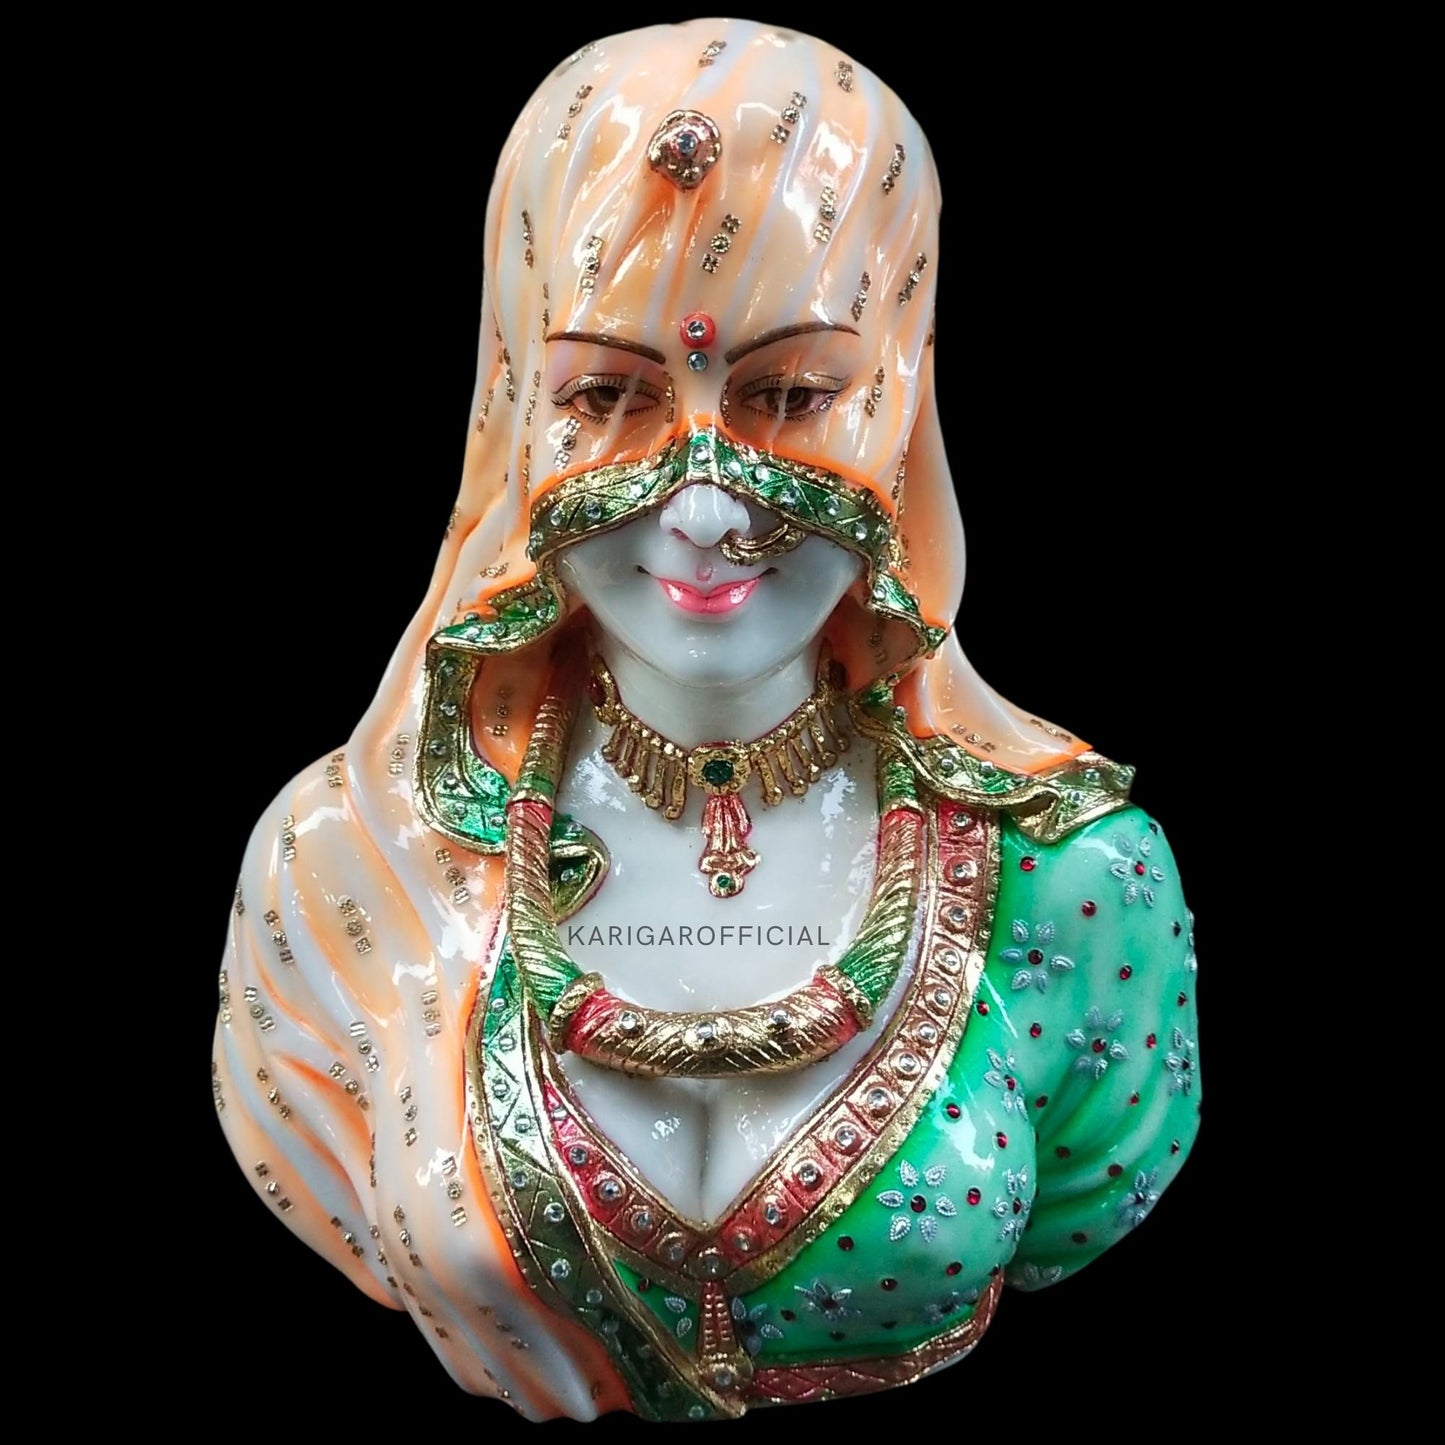 Bani Thani Bust Statue, Large 15 inches Murti, The Indian Mona Lisa Bust Marble Sculpture, Traditional Indian Women Figurine Bust, Multicolor Jewelry Clothes Figurine - Home Office Decor Gifts